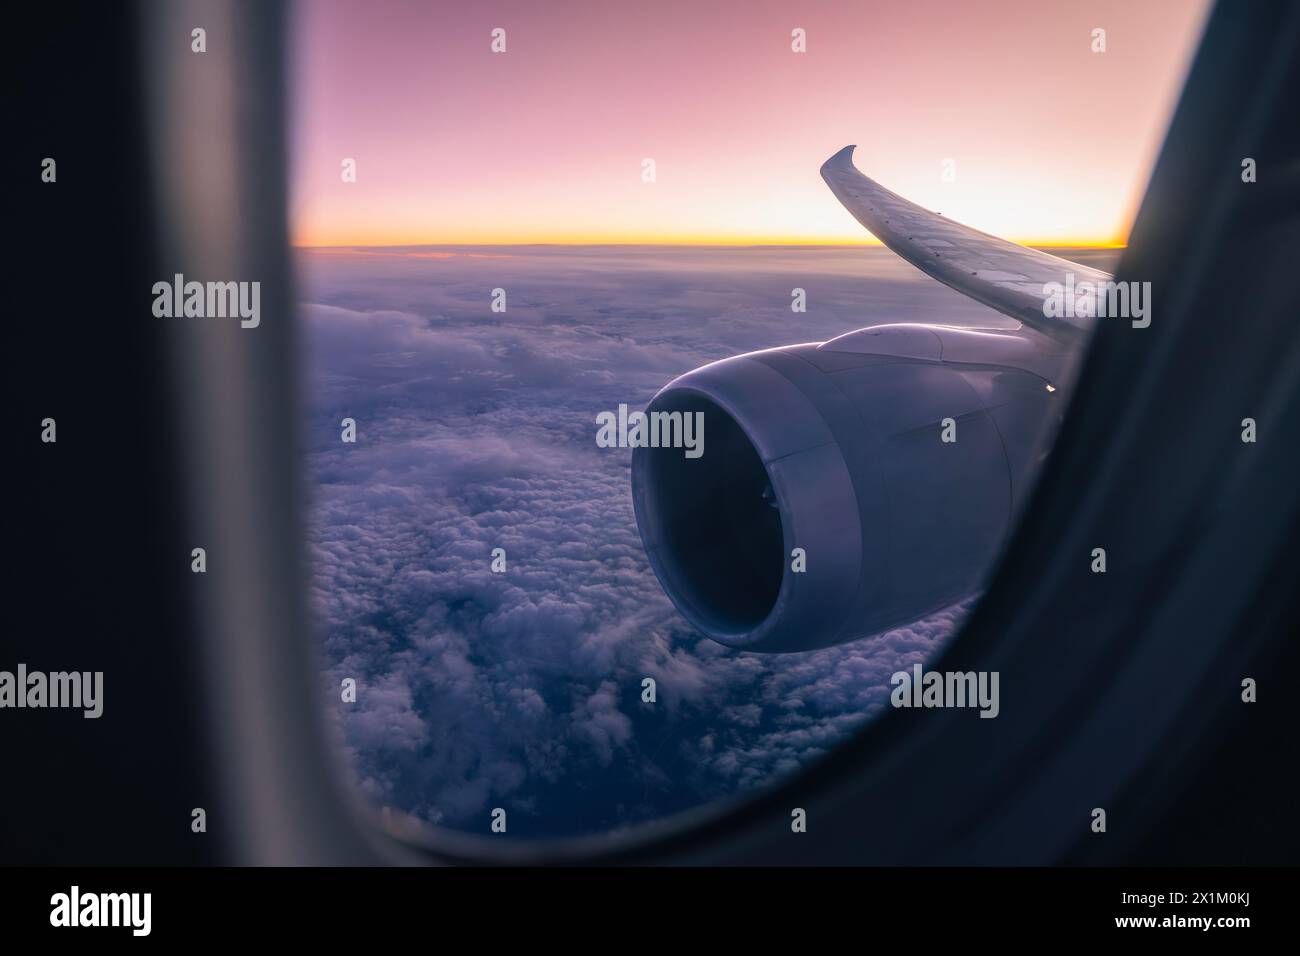 Beautiful view from airplane window over jet engine and wing. Plane flying high above clouds during dusk.Themes aviation, travel and connection. Stock Photo